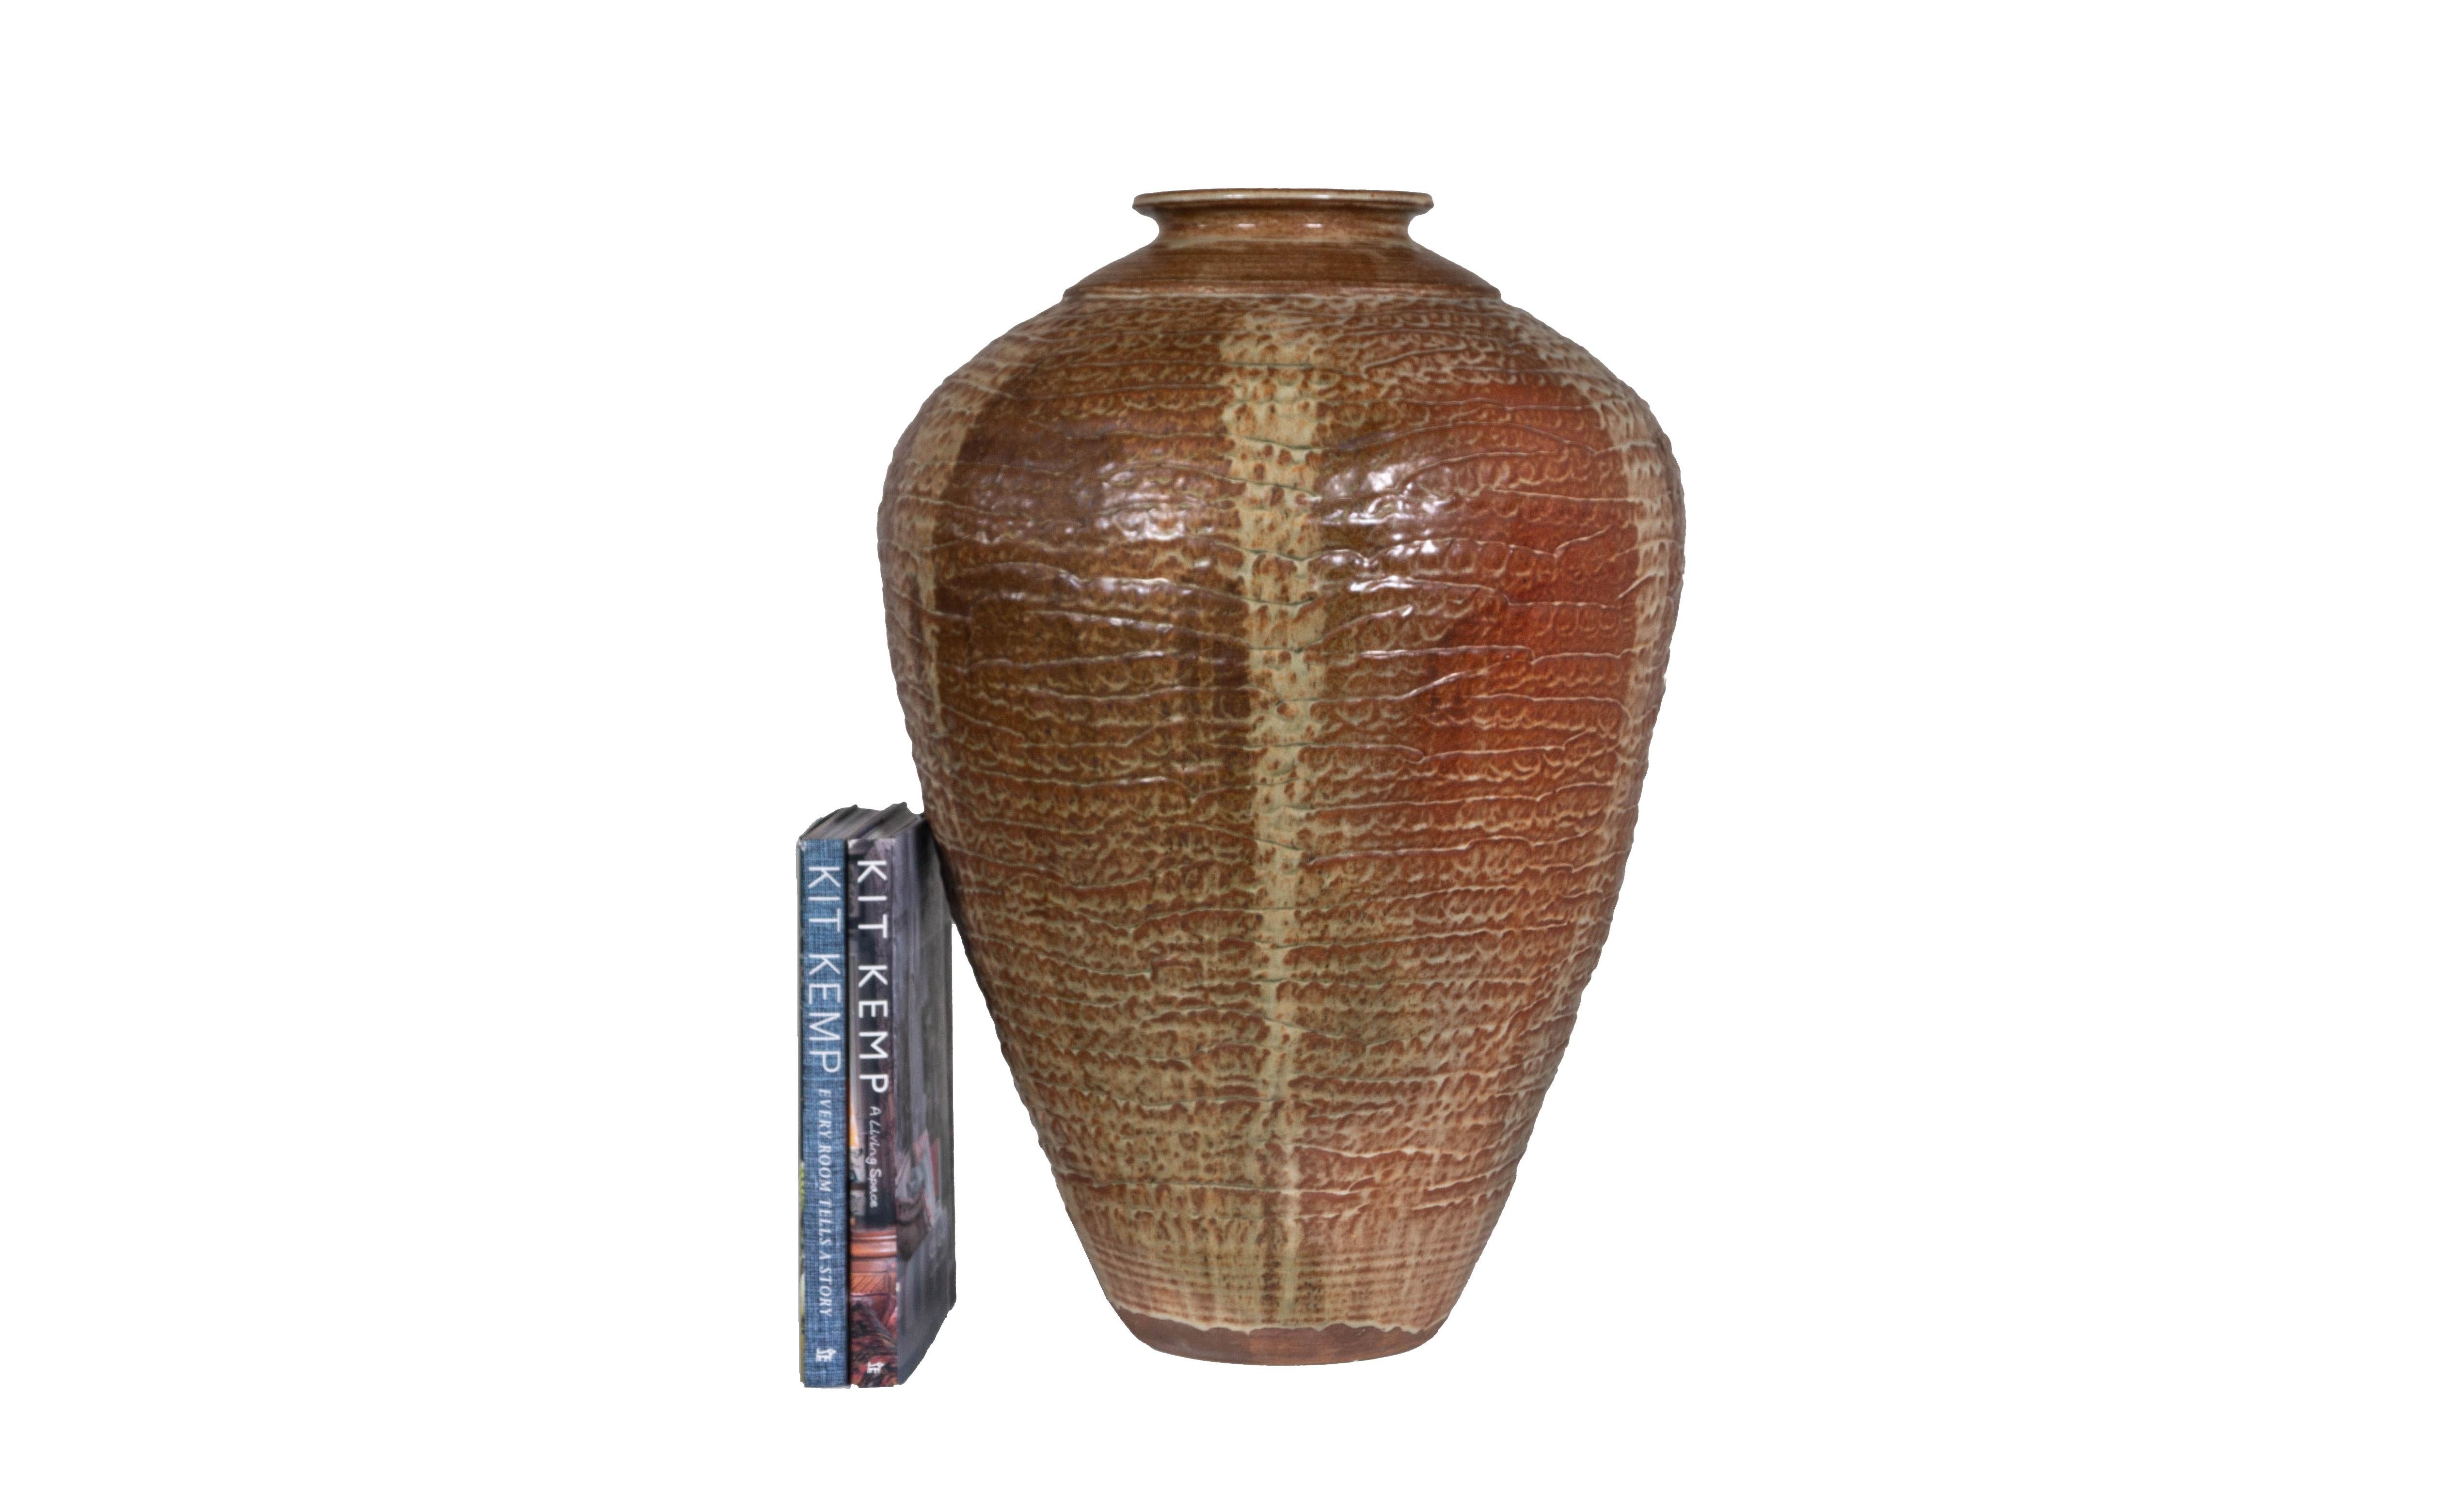 This monumental signed studio pot is truly something to behold. Its variegated tawny and sand colored glaze swirl together to create a one-of-a-kind work of art. Its ribbed texture is inviting to the touch and eye alike, the narrow opening of the